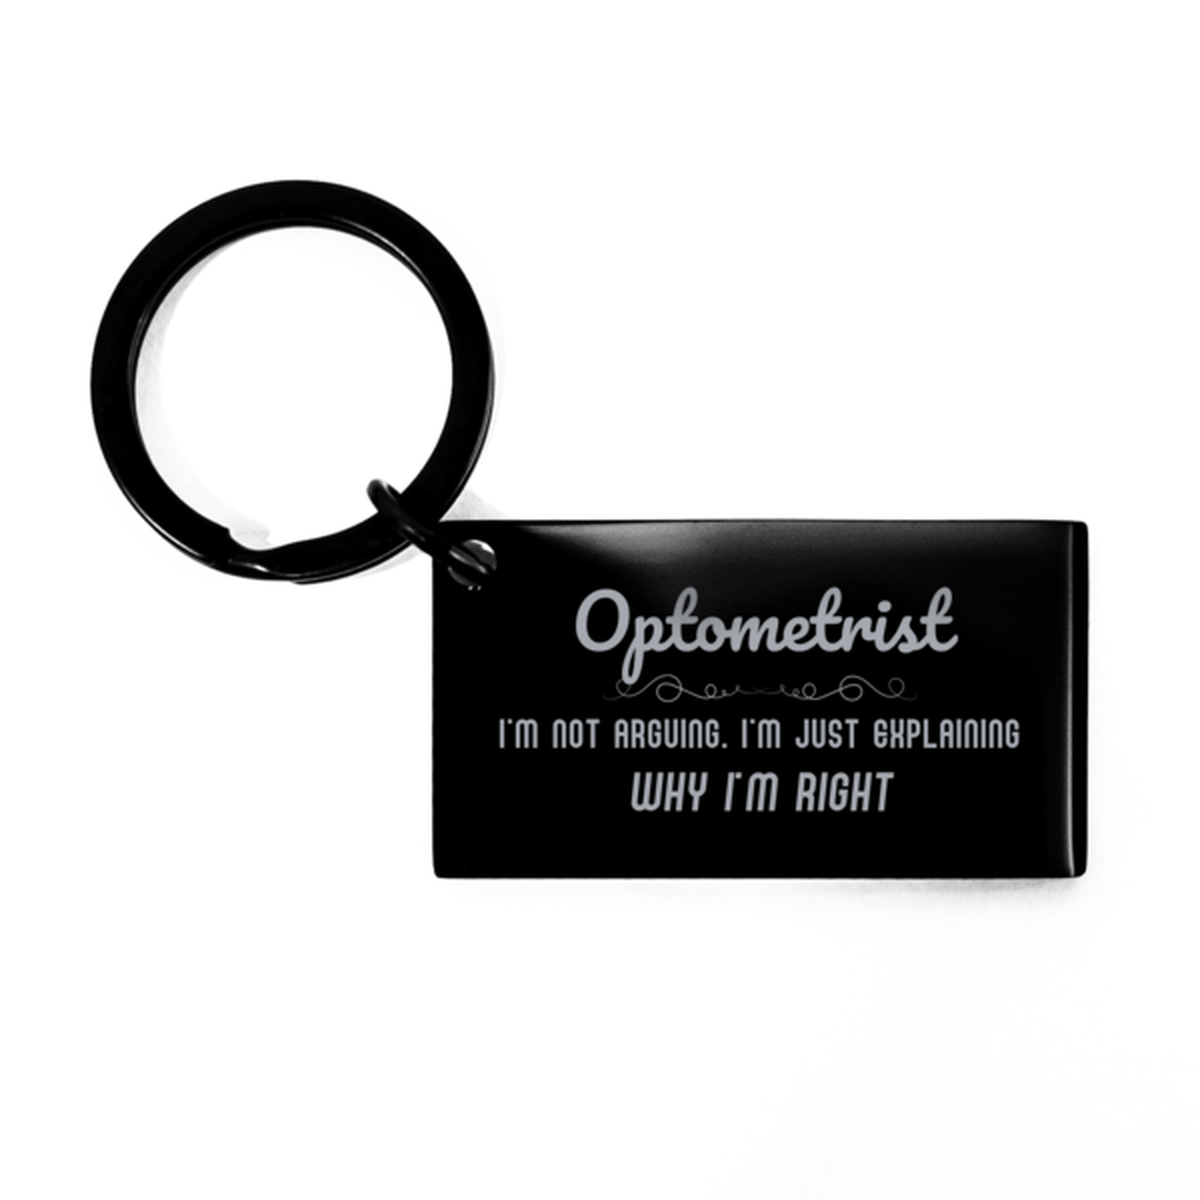 Optometrist I'm not Arguing. I'm Just Explaining Why I'm RIGHT Keychain, Funny Saying Quote Optometrist Gifts For Optometrist Graduation Birthday Christmas Gifts for Men Women Coworker